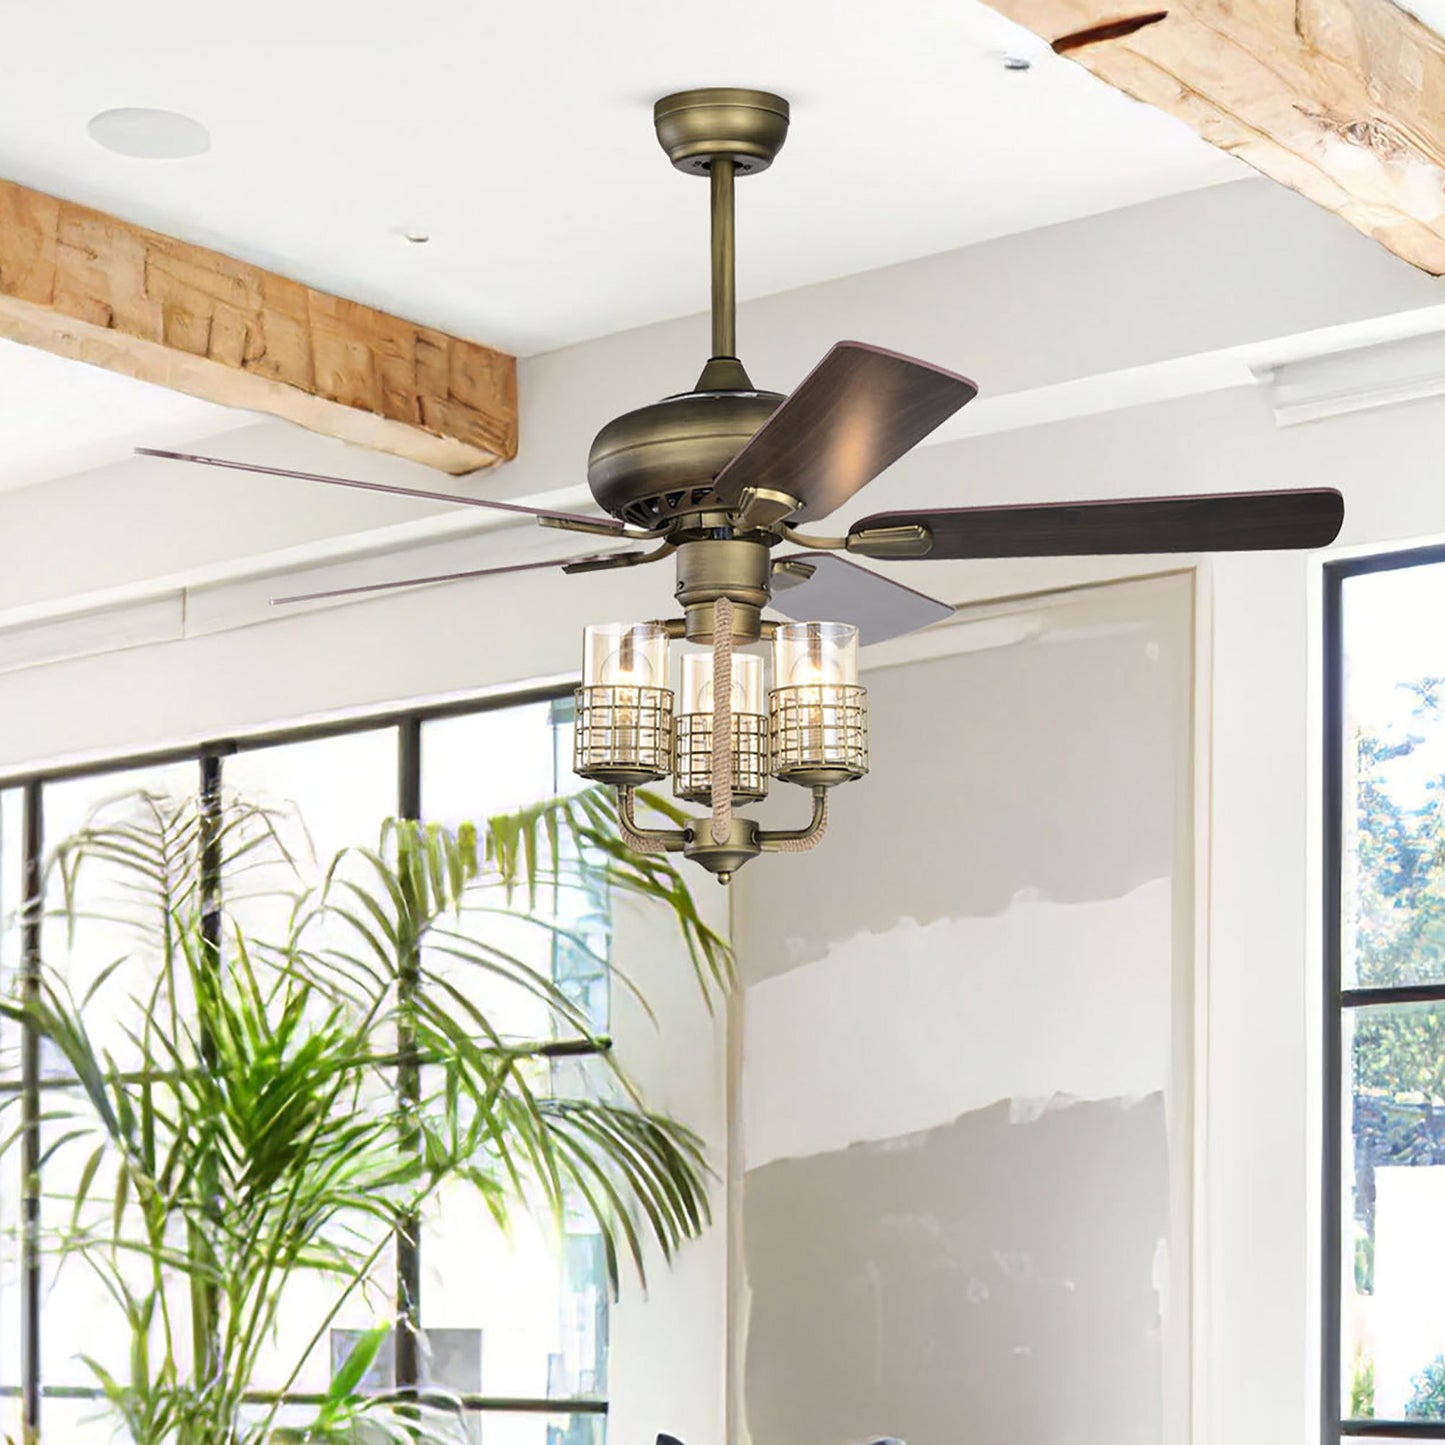 Vintage Style 52-inch Bronze Metal Ceiling Fan with Wood Blades and Remote Control